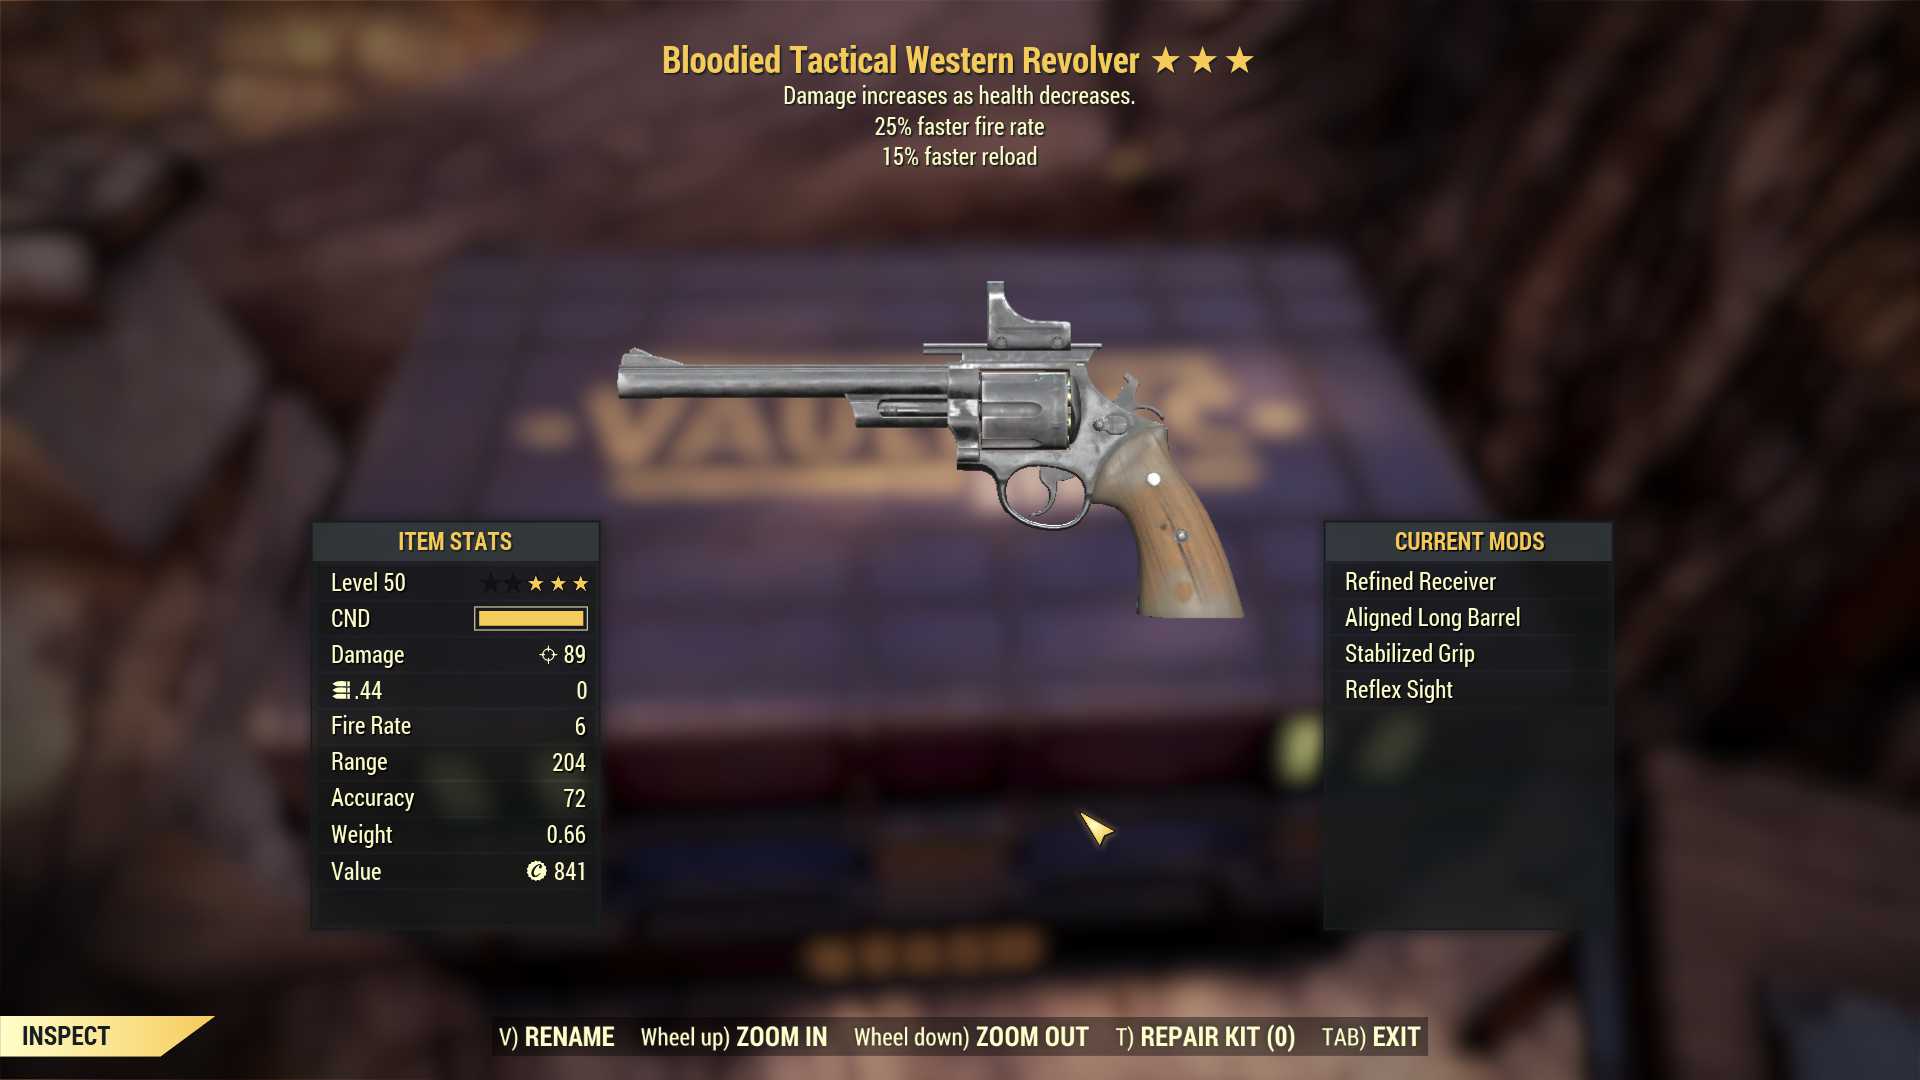 Bloodied Western Revolver (25% faster fire rate, 15% faster reload)